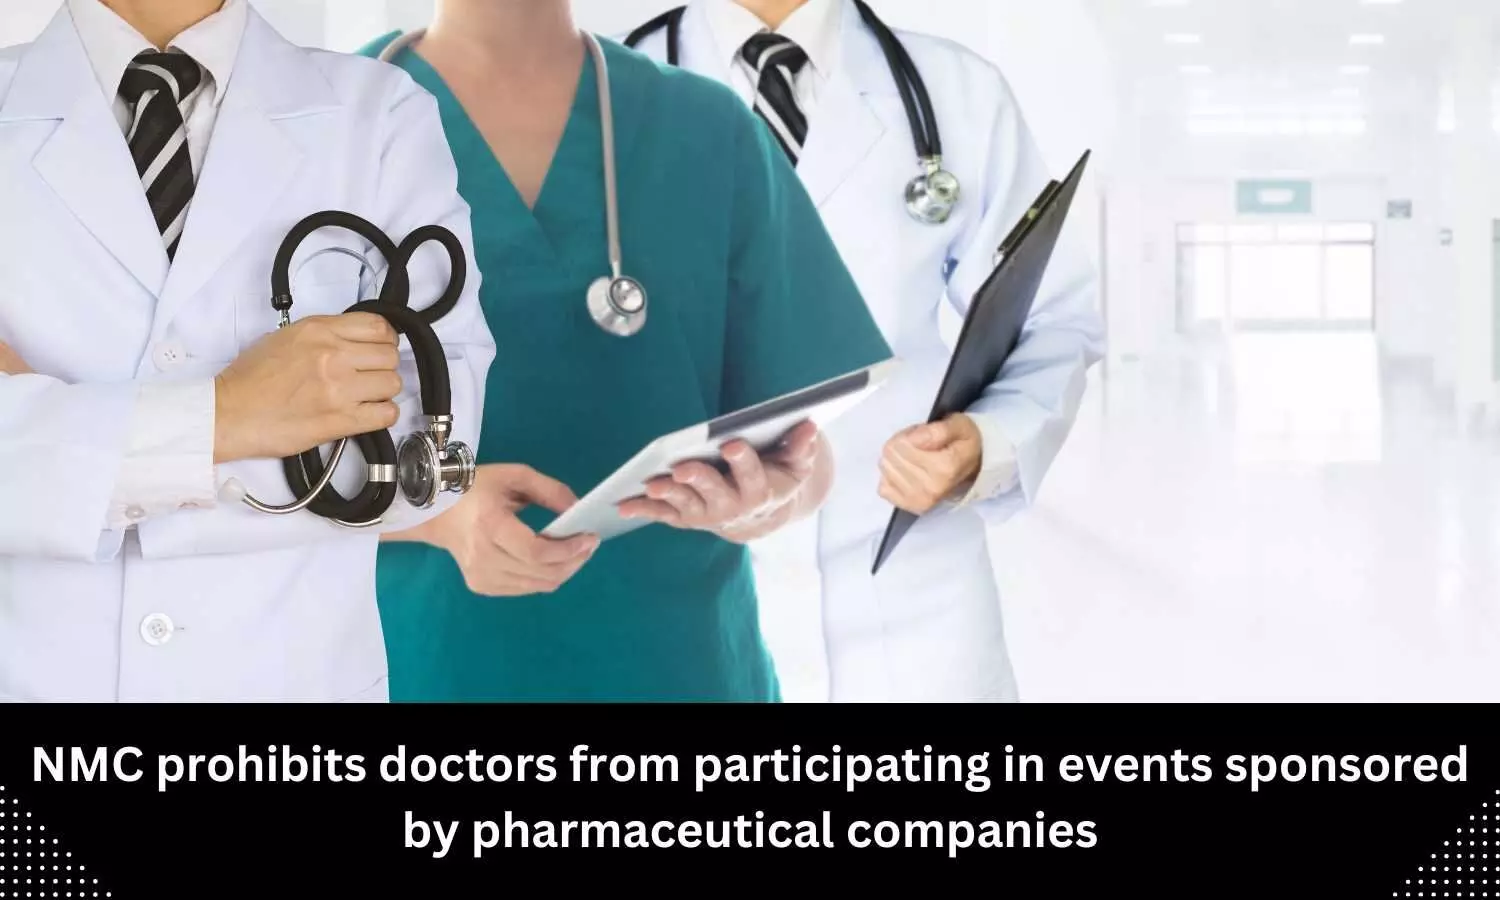 NMC prohibits doctors from participating in events sponsored by pharmaceutical companies